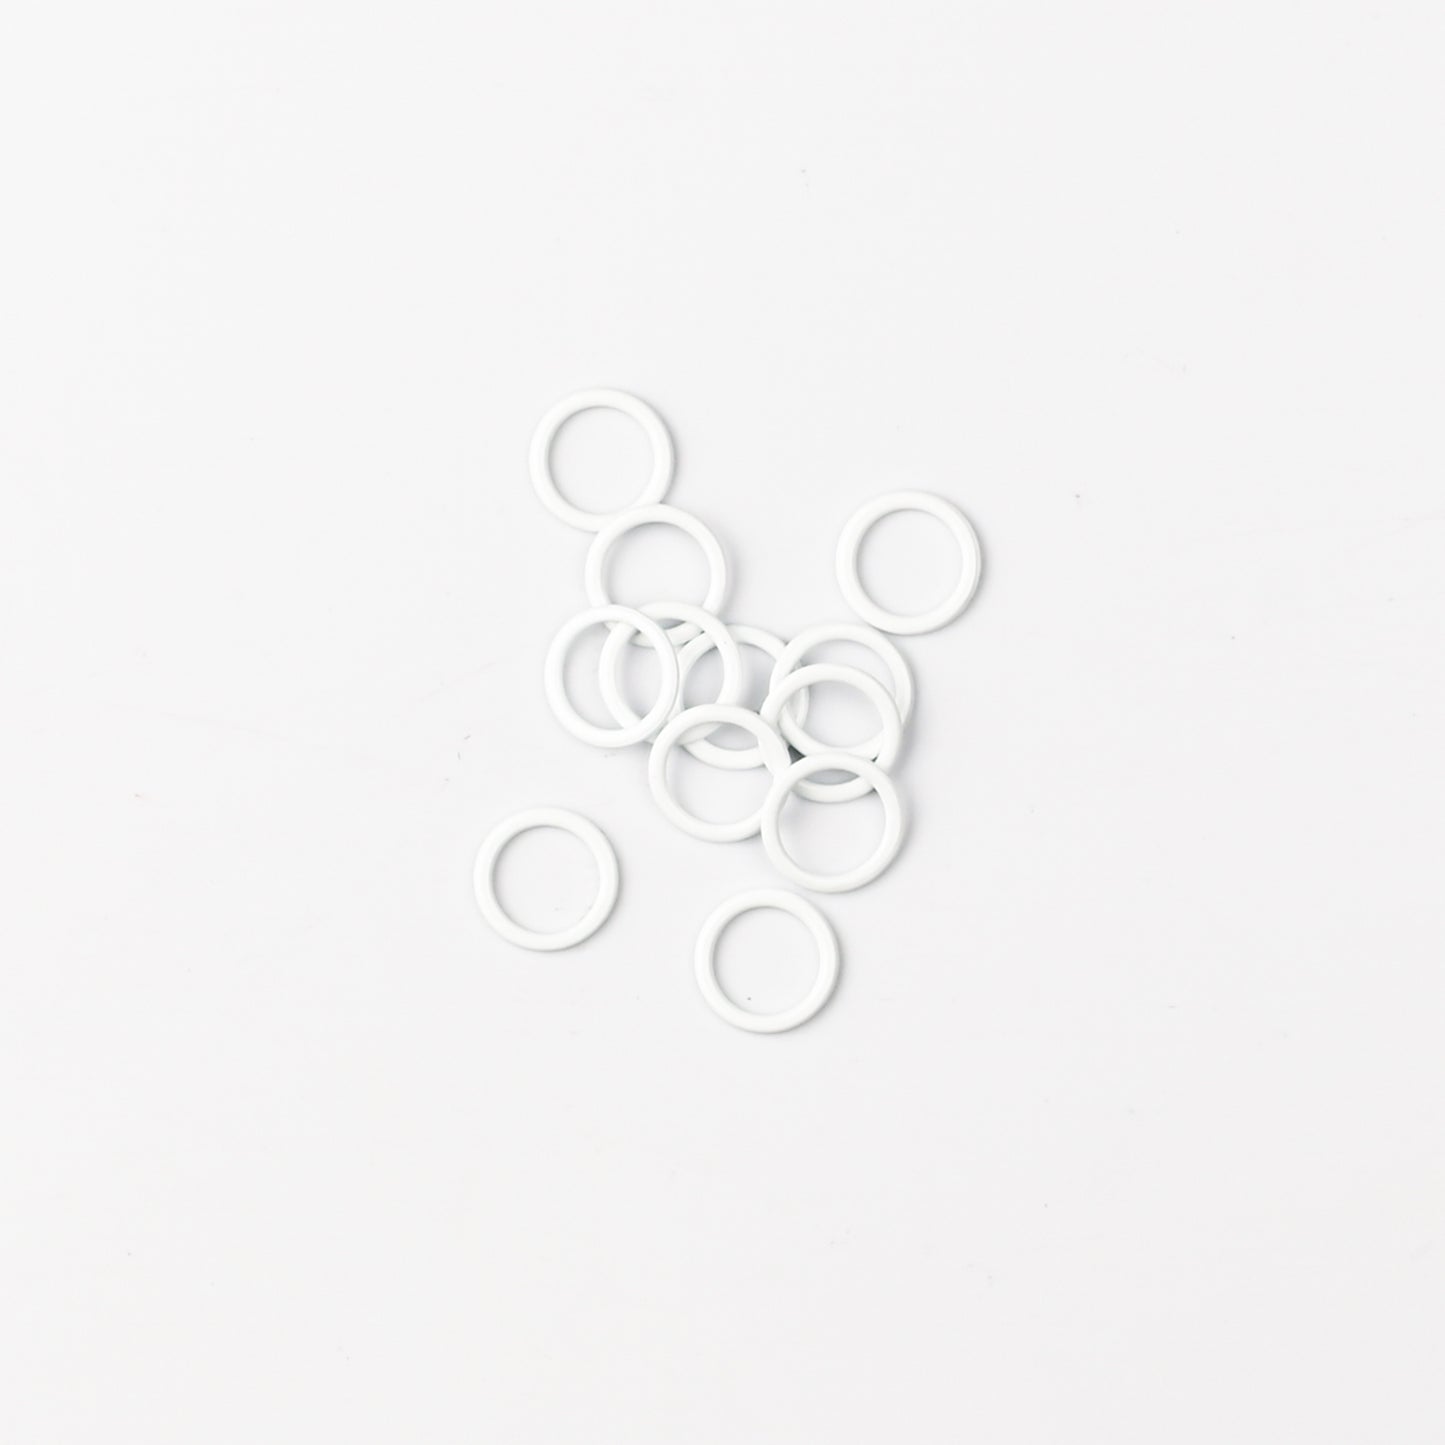 Bra Accessories Circle 8mm Black & White - TO BE DISCONTINUED